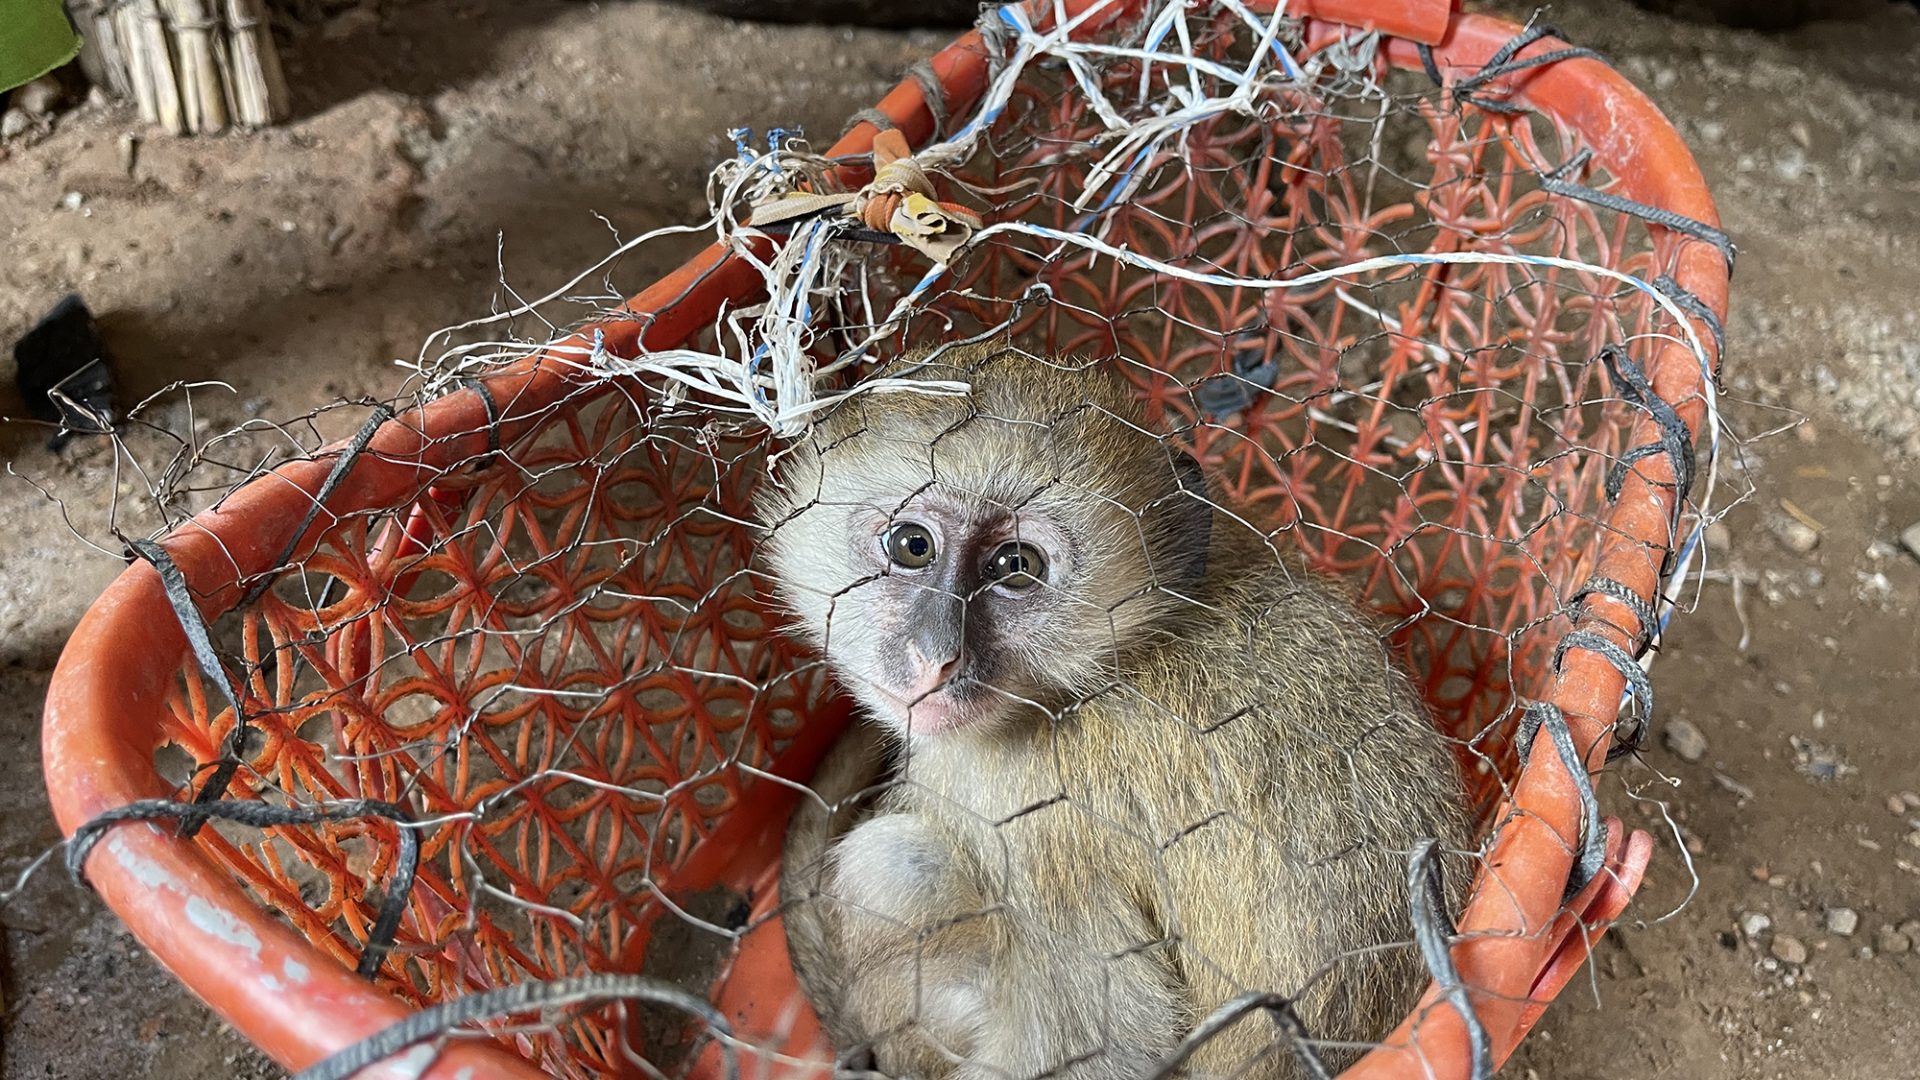 A vervet monkey is sat in a small red basket with netting over the top